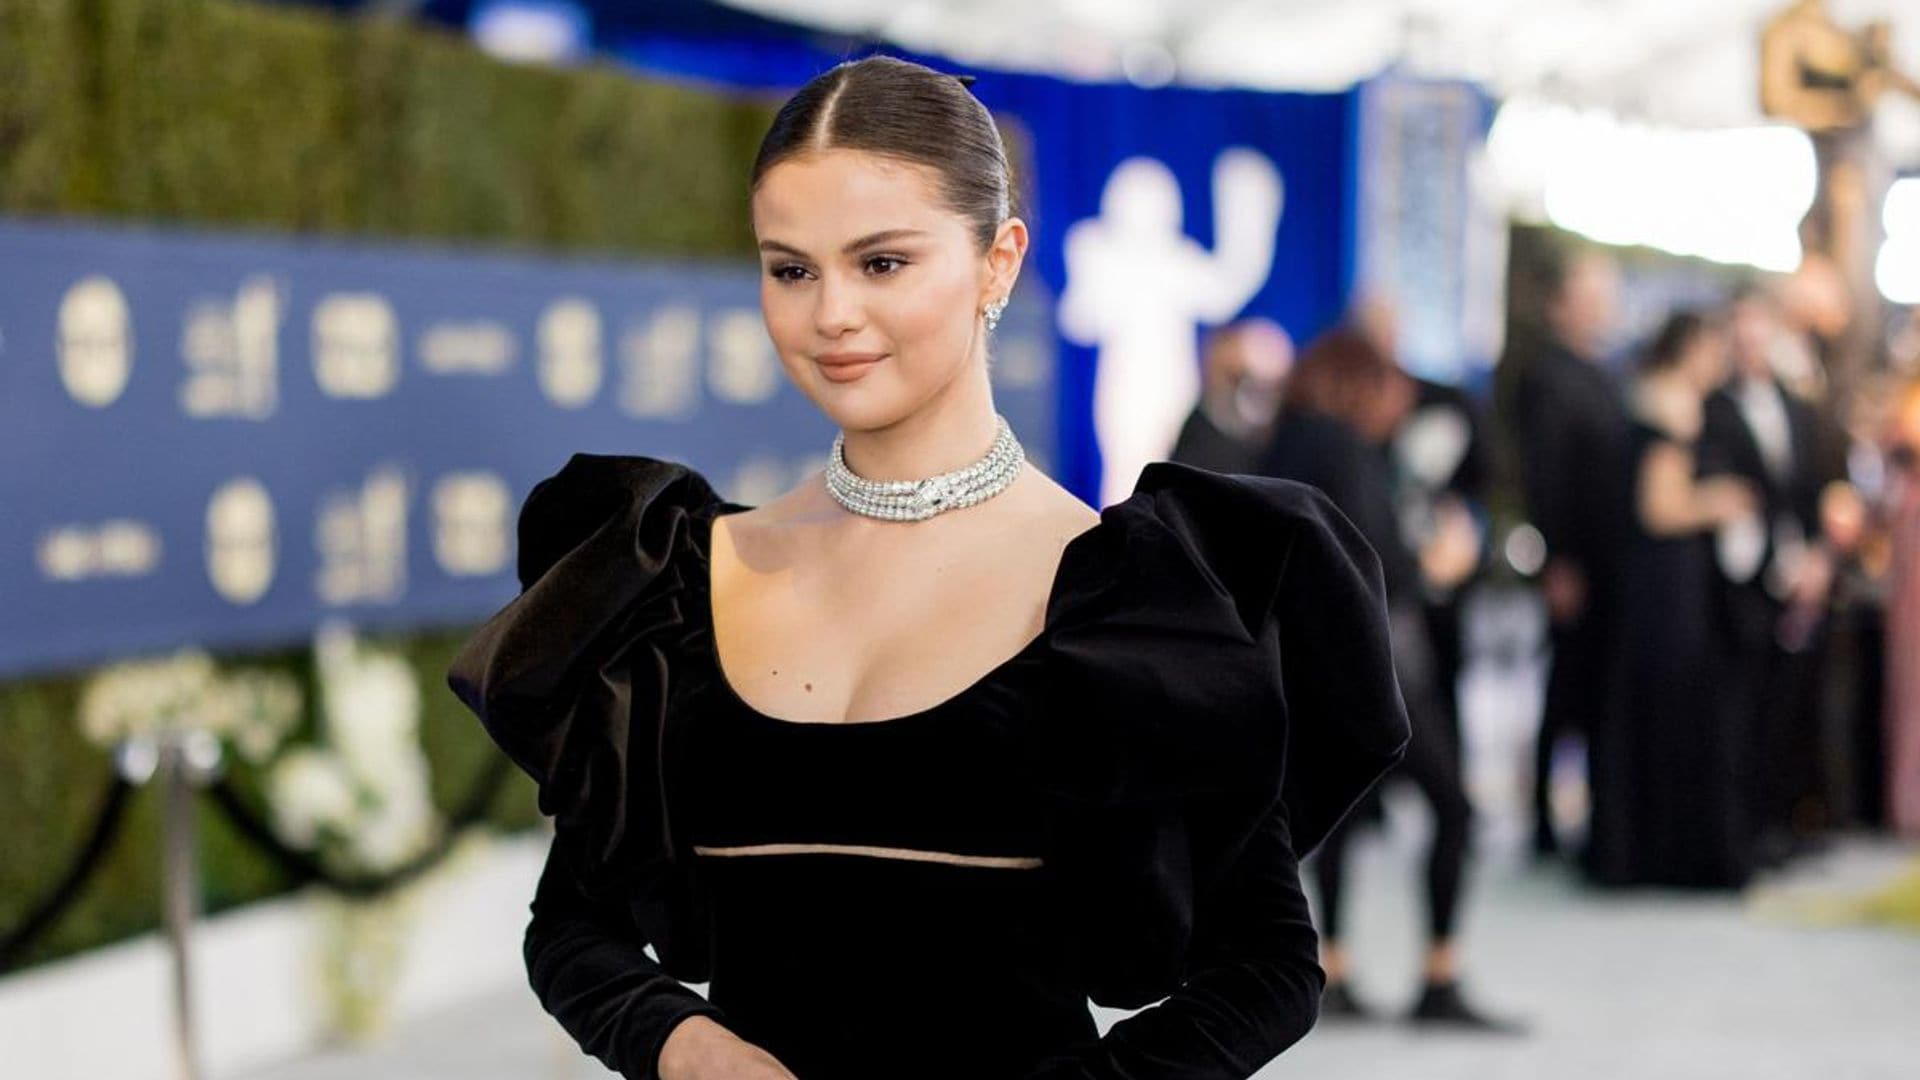 Why did Selena Gomez present barefooted at the SAG Awards?